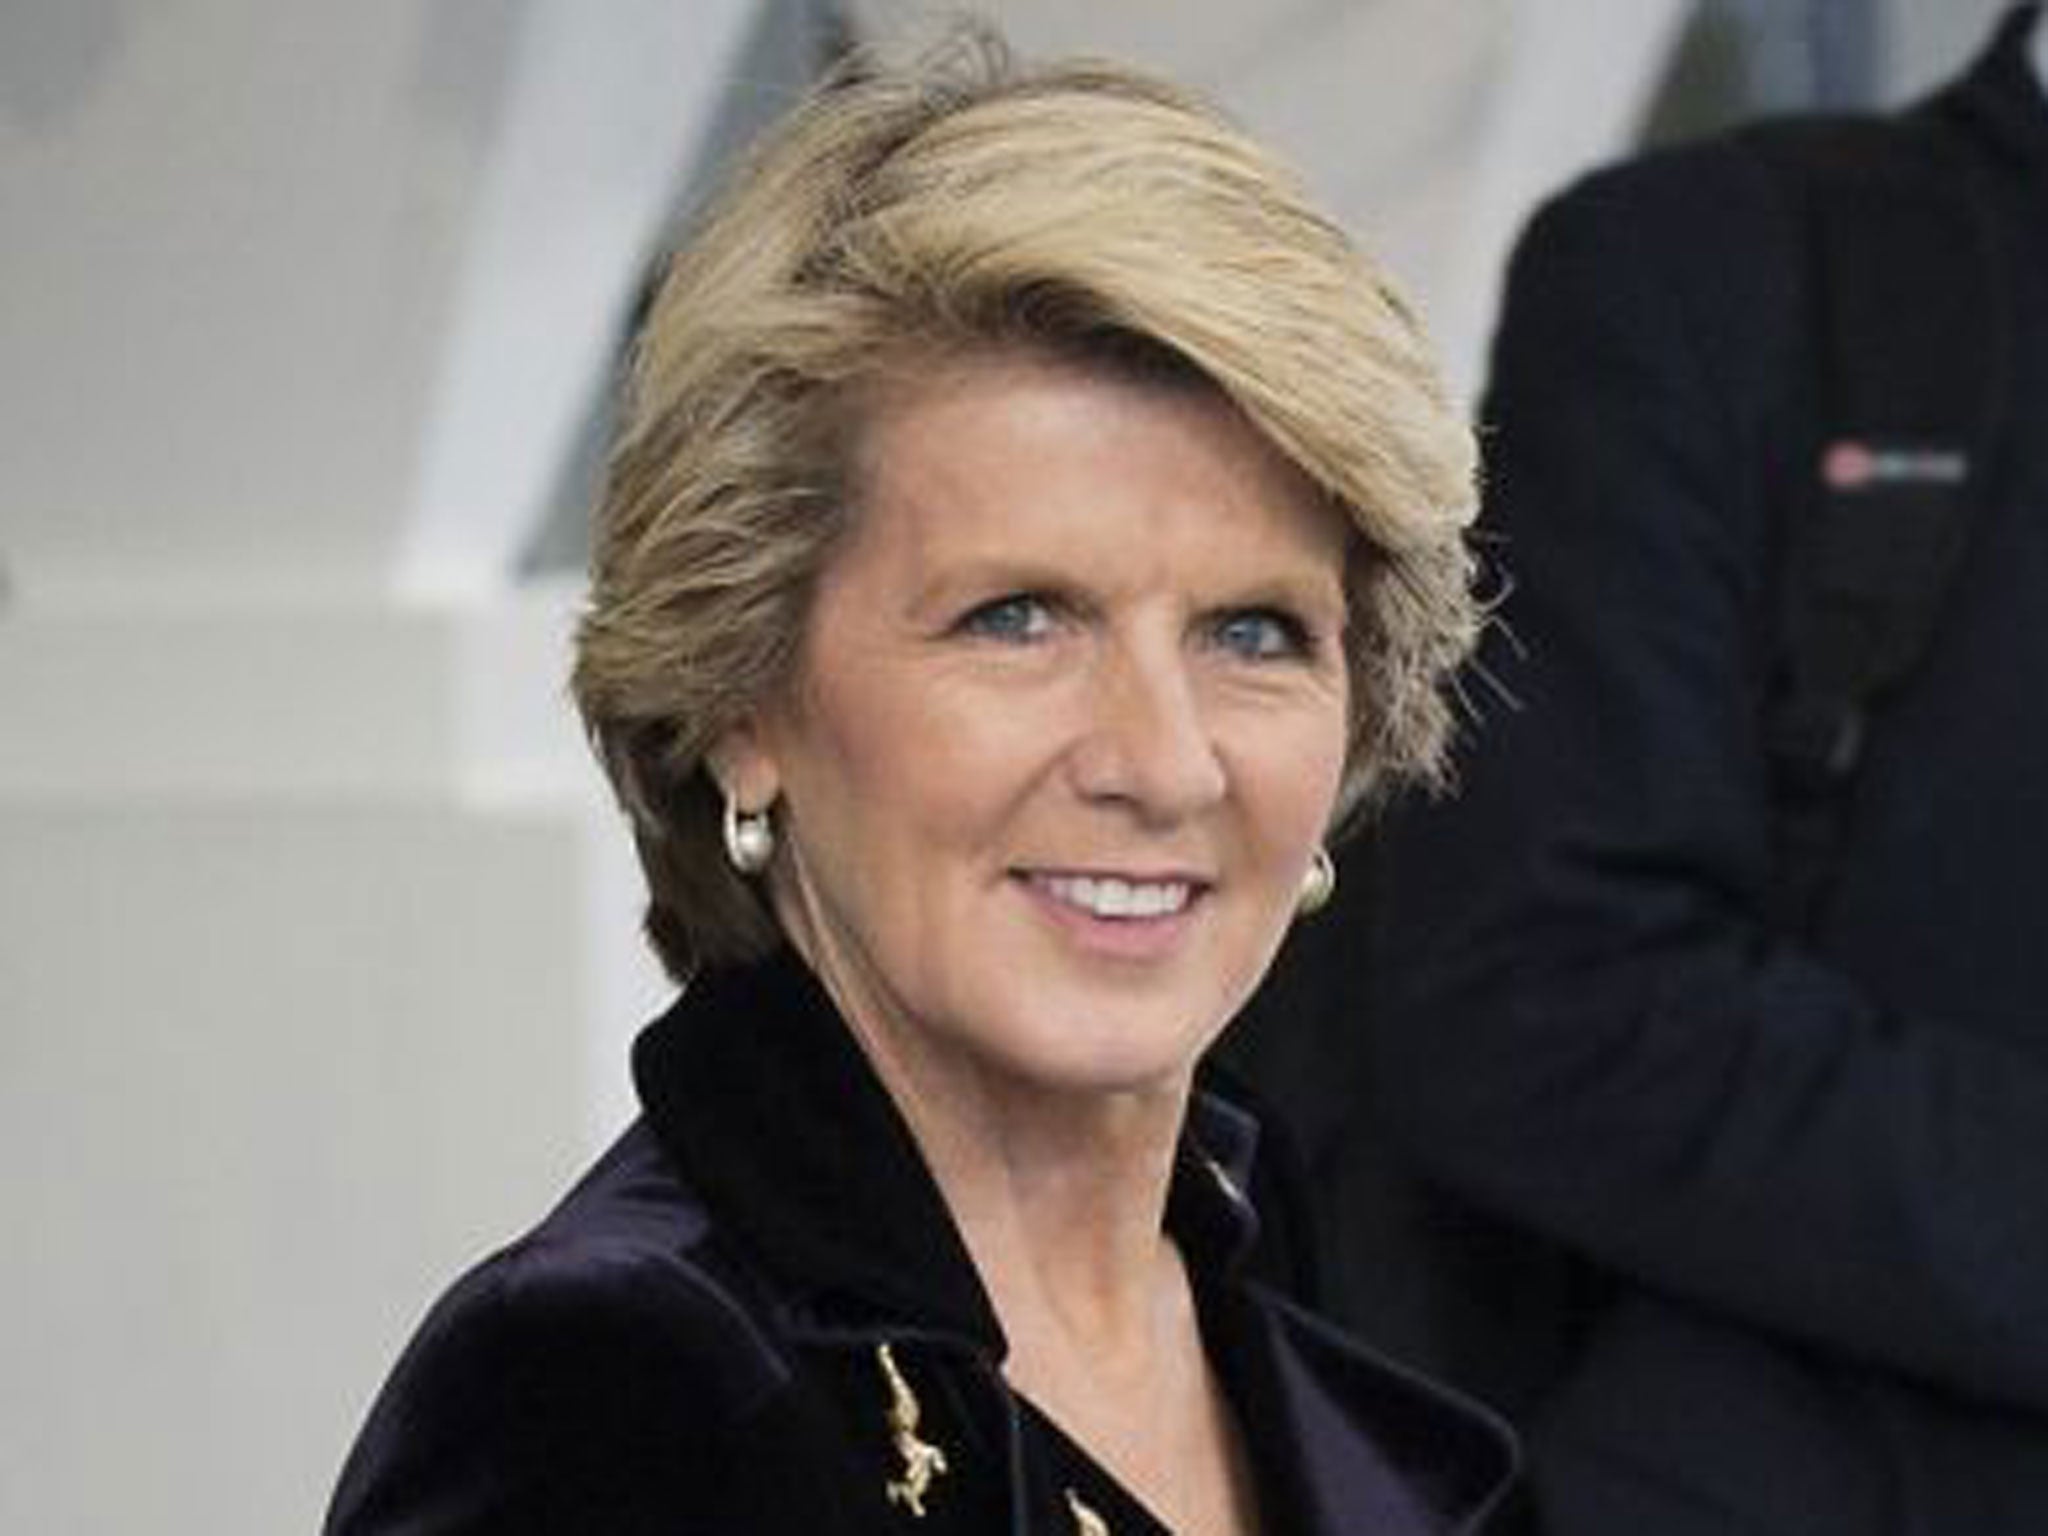 Australian Foreign Minister Julie Bishop leaves at the end of the Nuclear Security Summit in The Hague on March 25, 2014